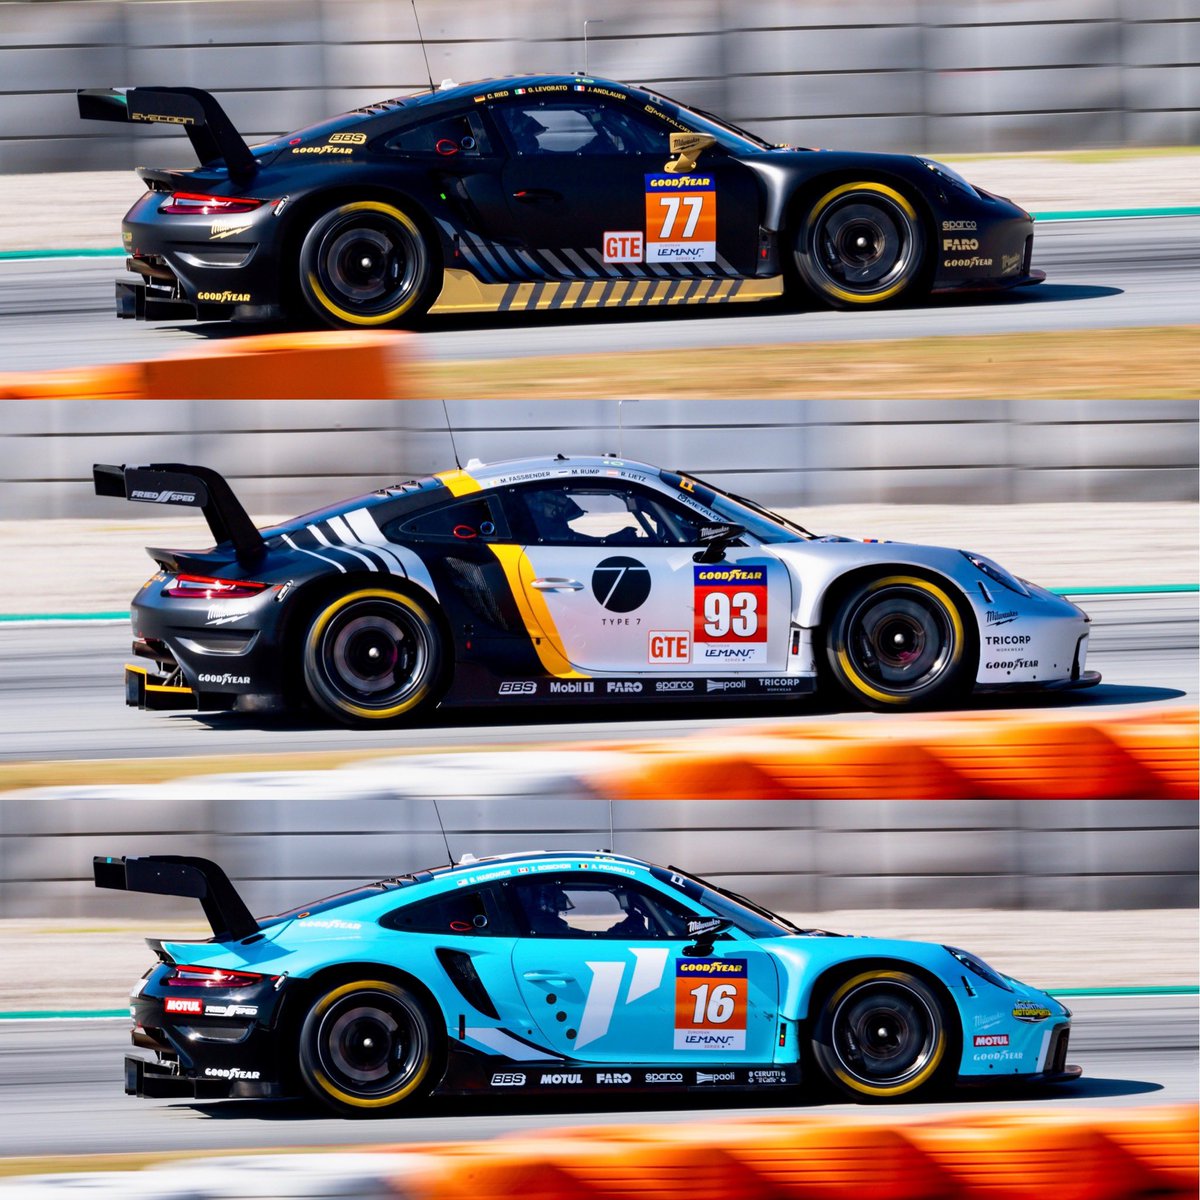 #ELMS - Our GT cars were looking good during the morning session 🤩 #Prologue #4hBarcelona